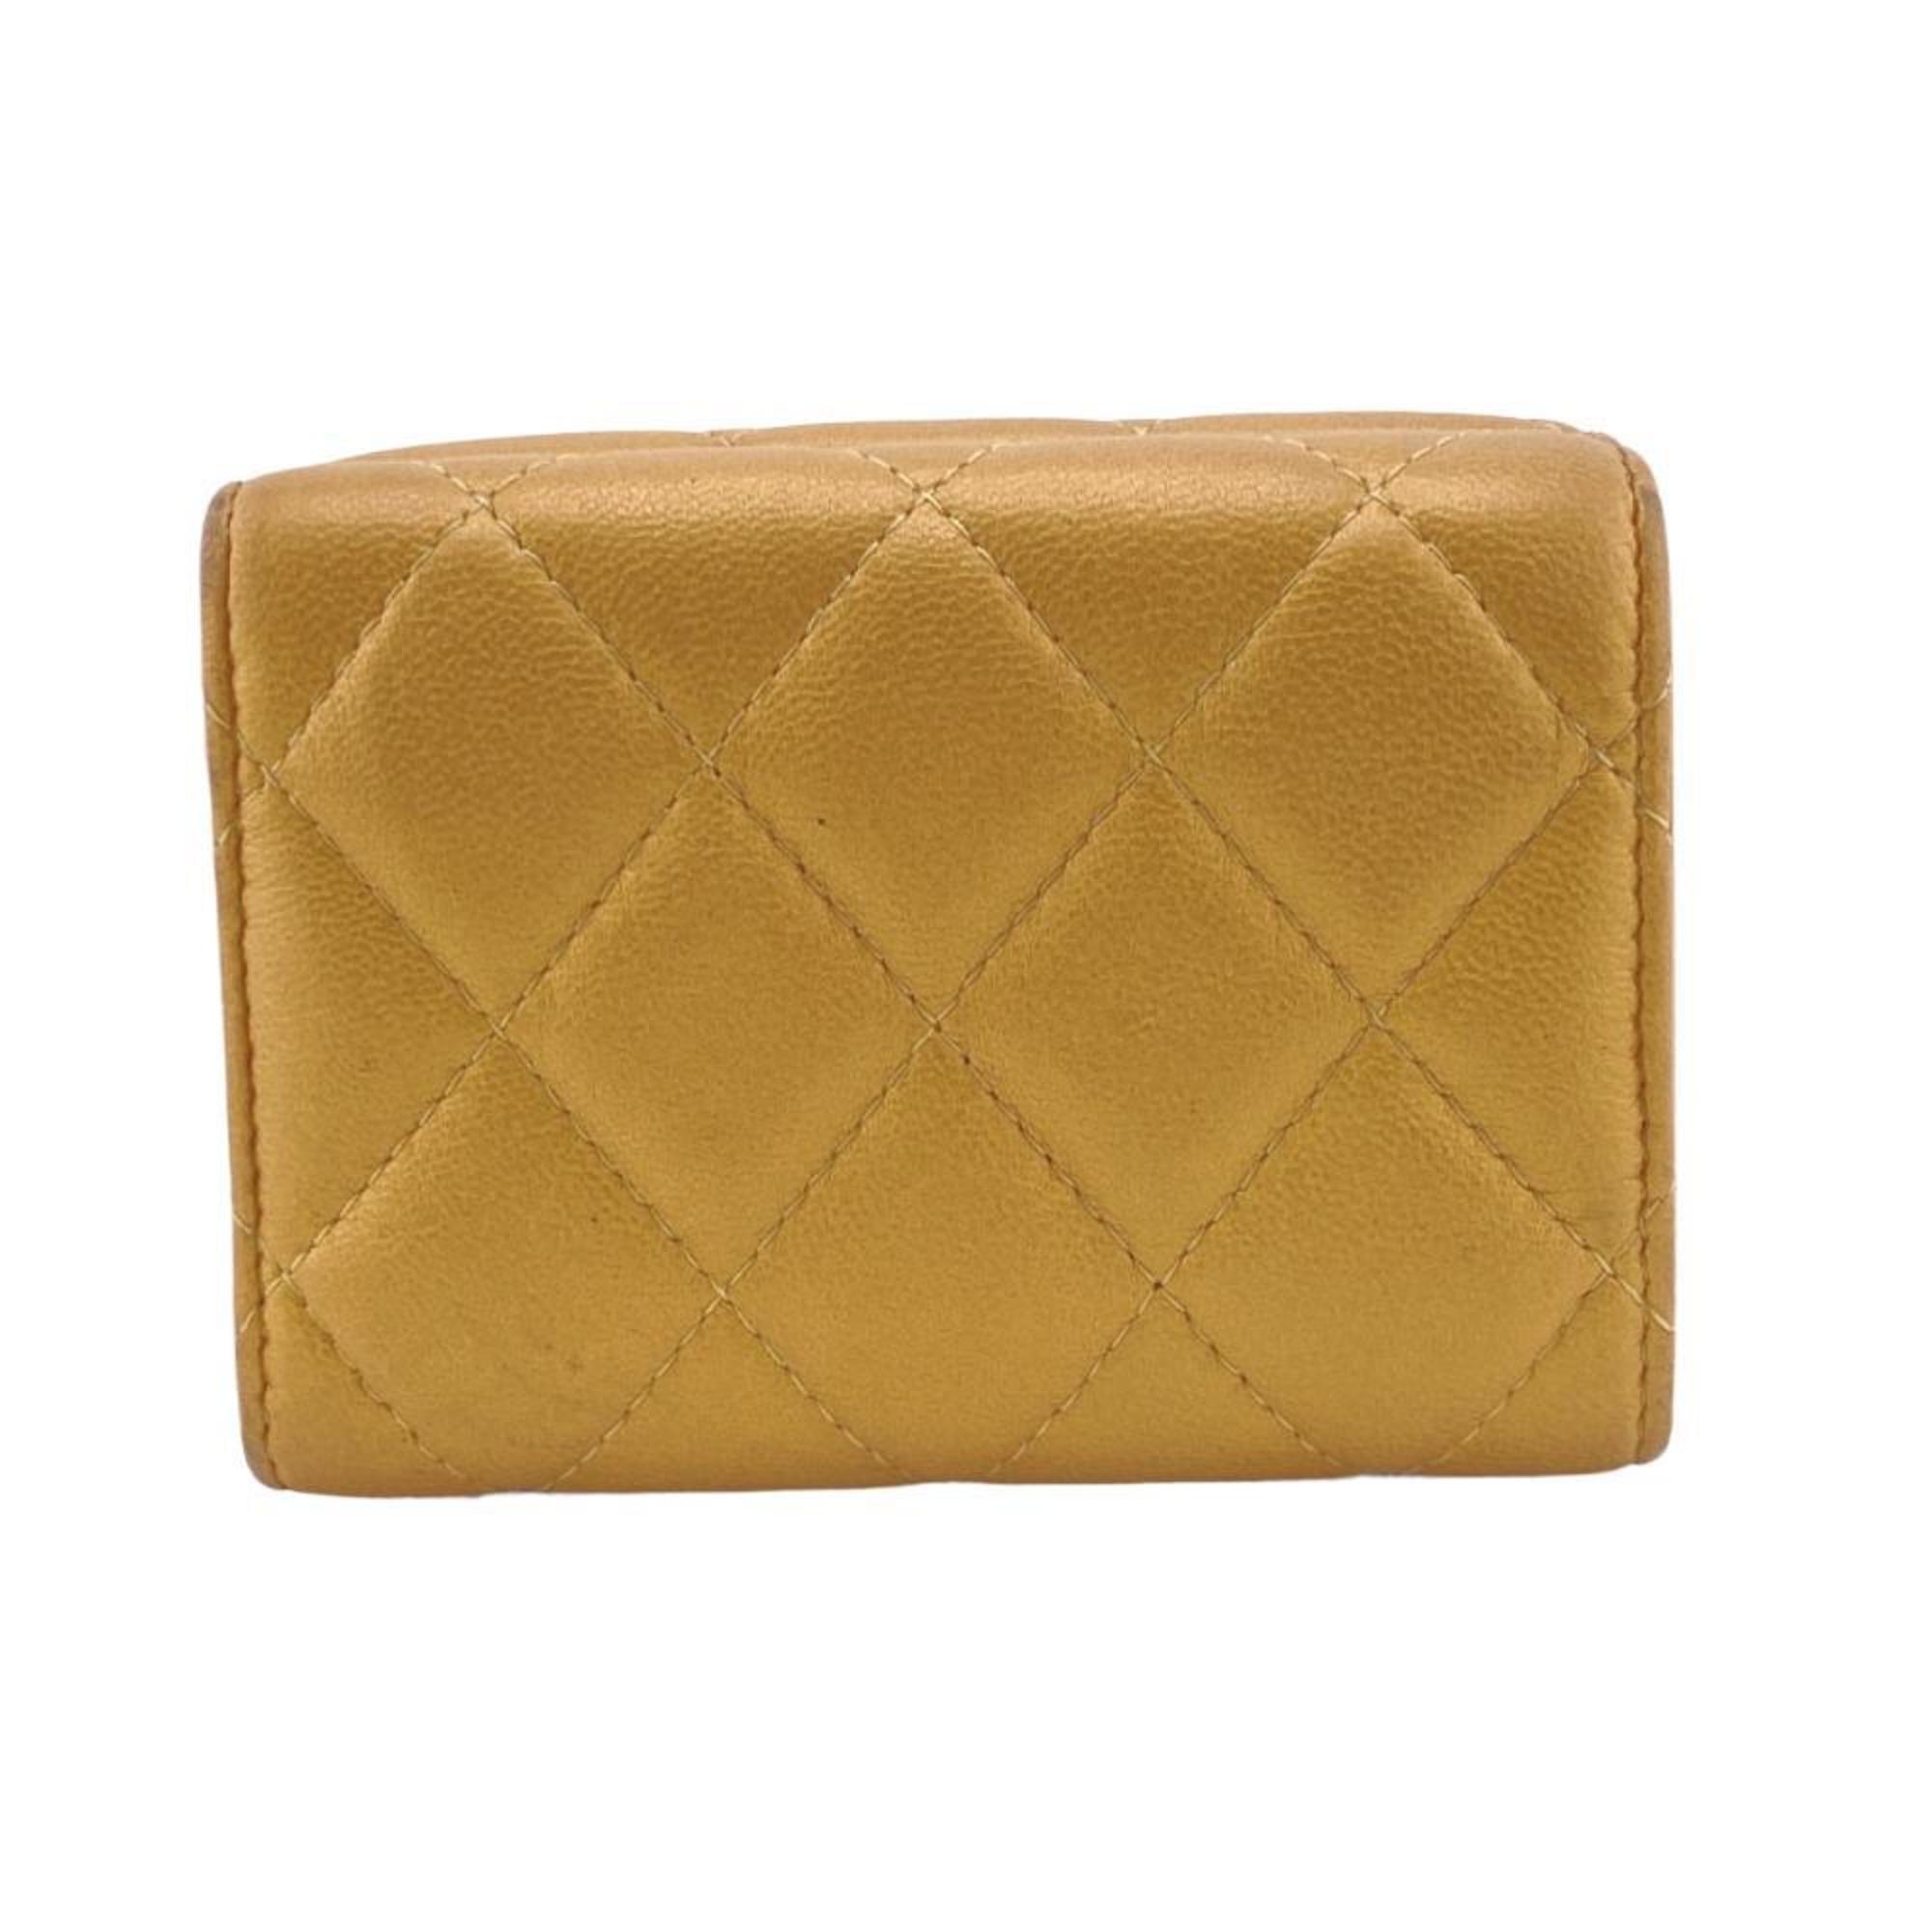 CHANEL Compact Wallet Coco Mark Matelasse Trifold Gold Women's Z0005167